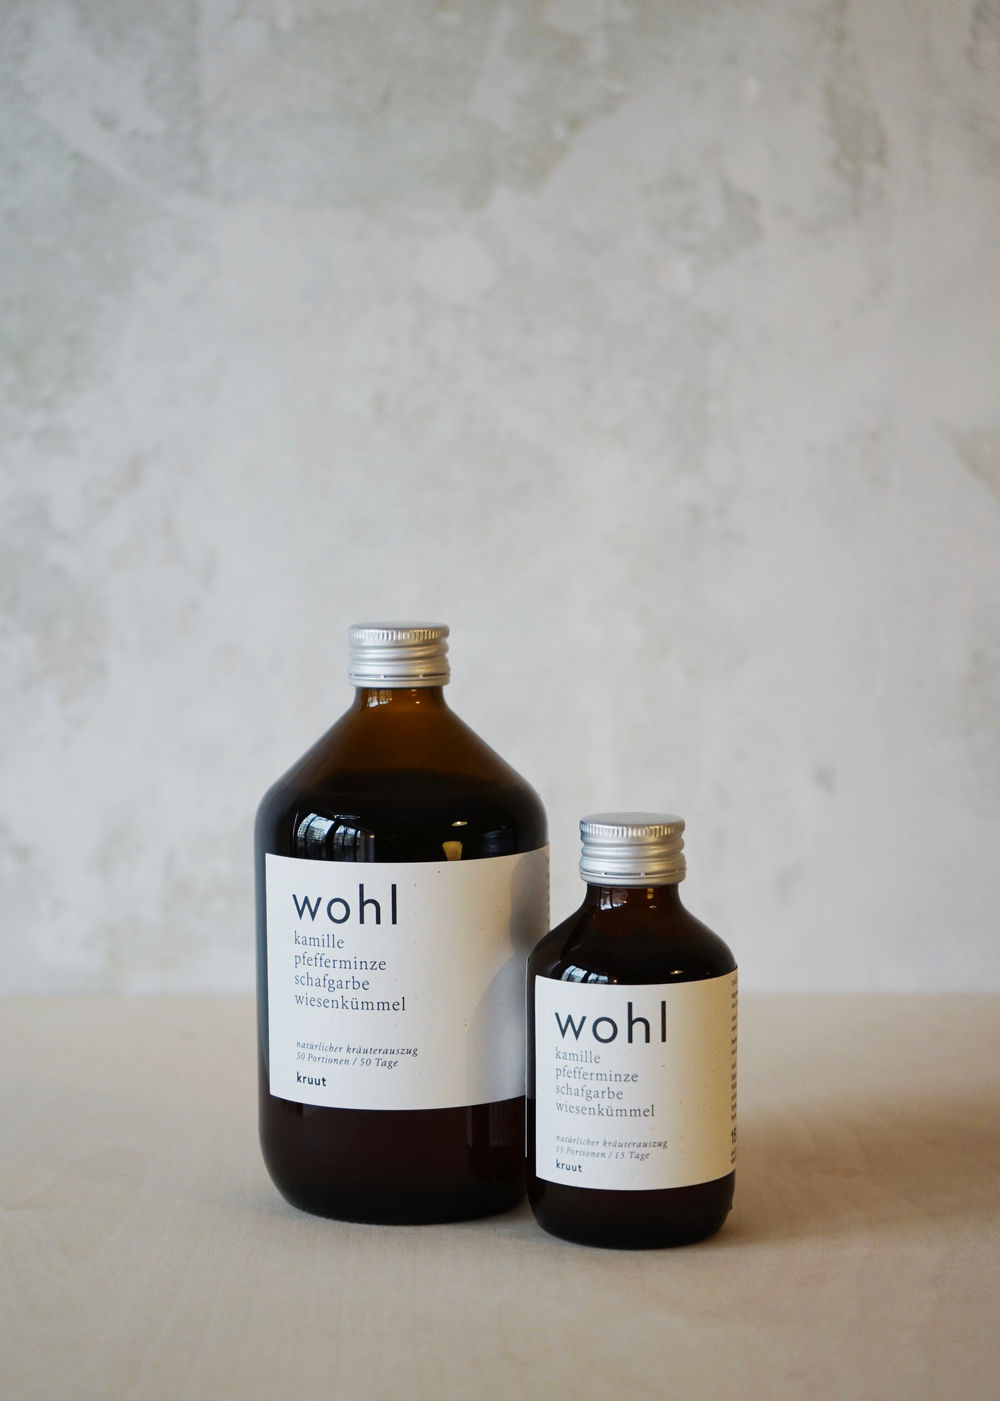 Wohl (Wellbeing)